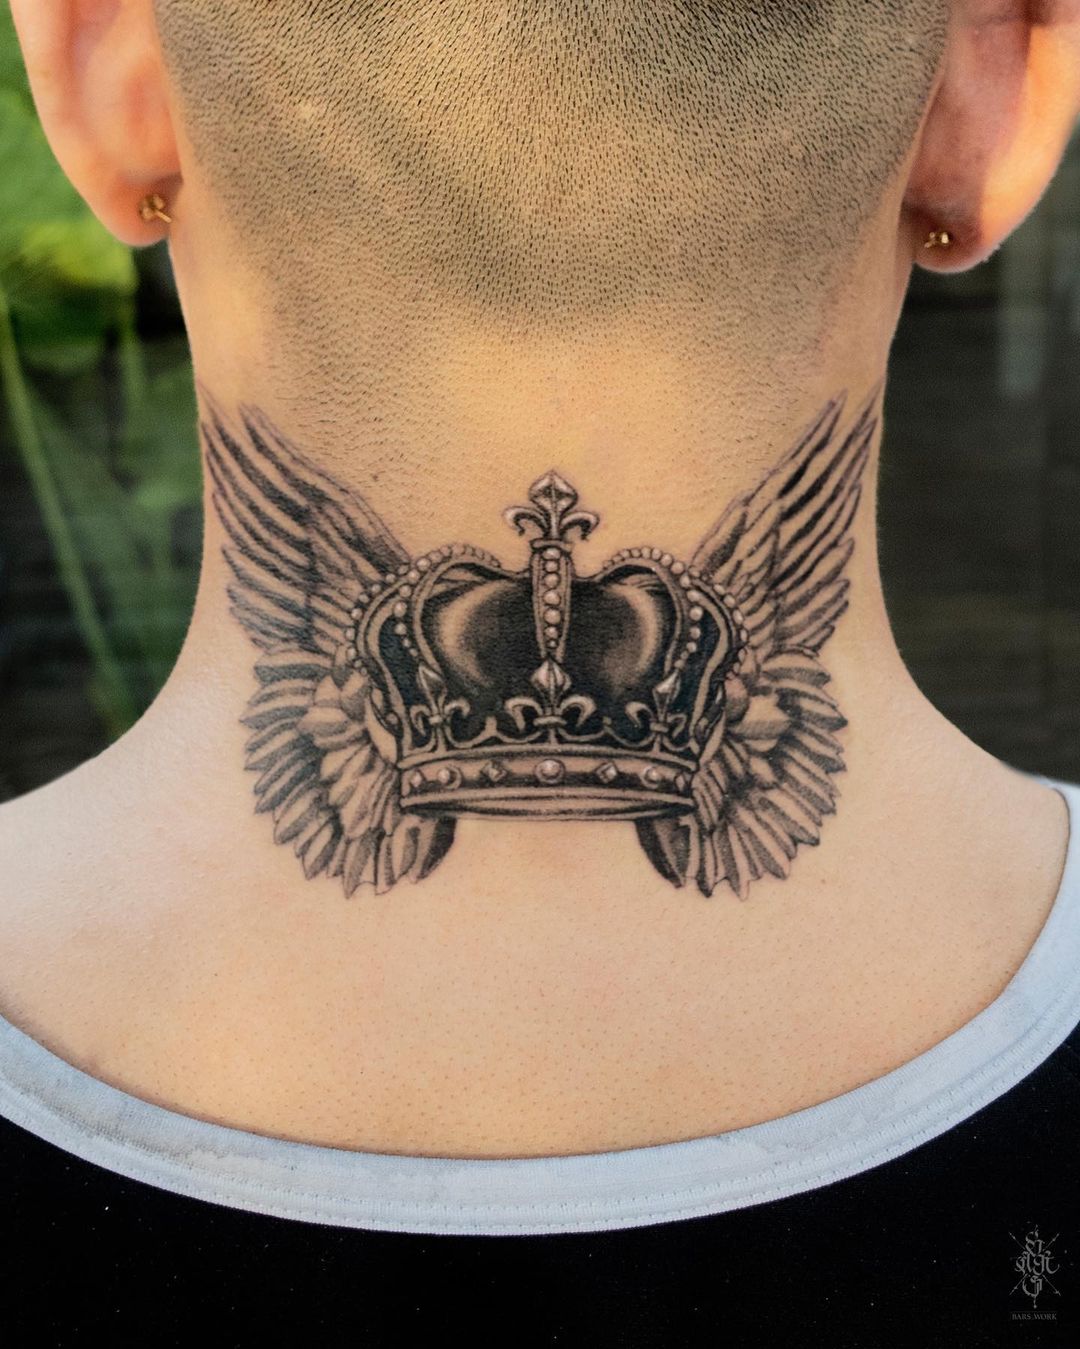 44 Creative Neck Tattoo Ideas for Men and Women You Must See - Hairstyle